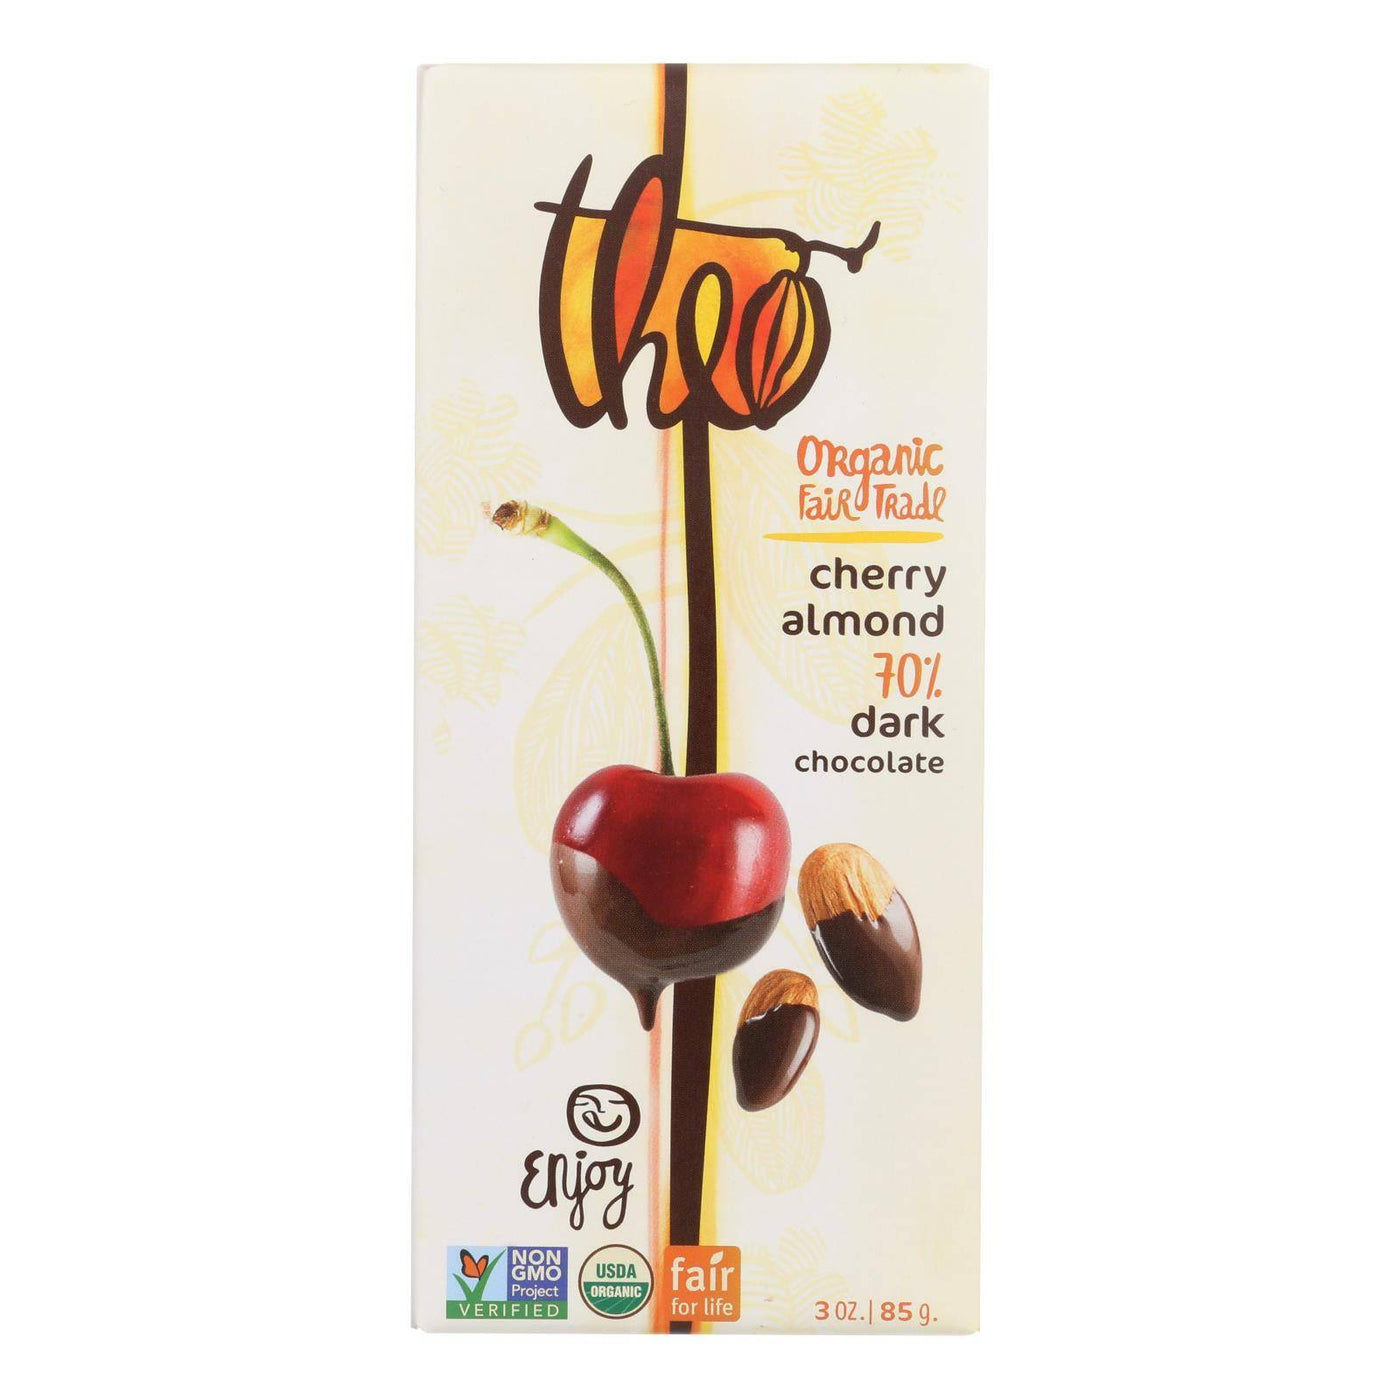 Theo Chocolate Organic Chocolate Bar - Classic - Dark Chocolate - 70 Percent Cacao - Cherry And Almond - 3 Oz Bars - Case Of 12 | OnlyNaturals.us